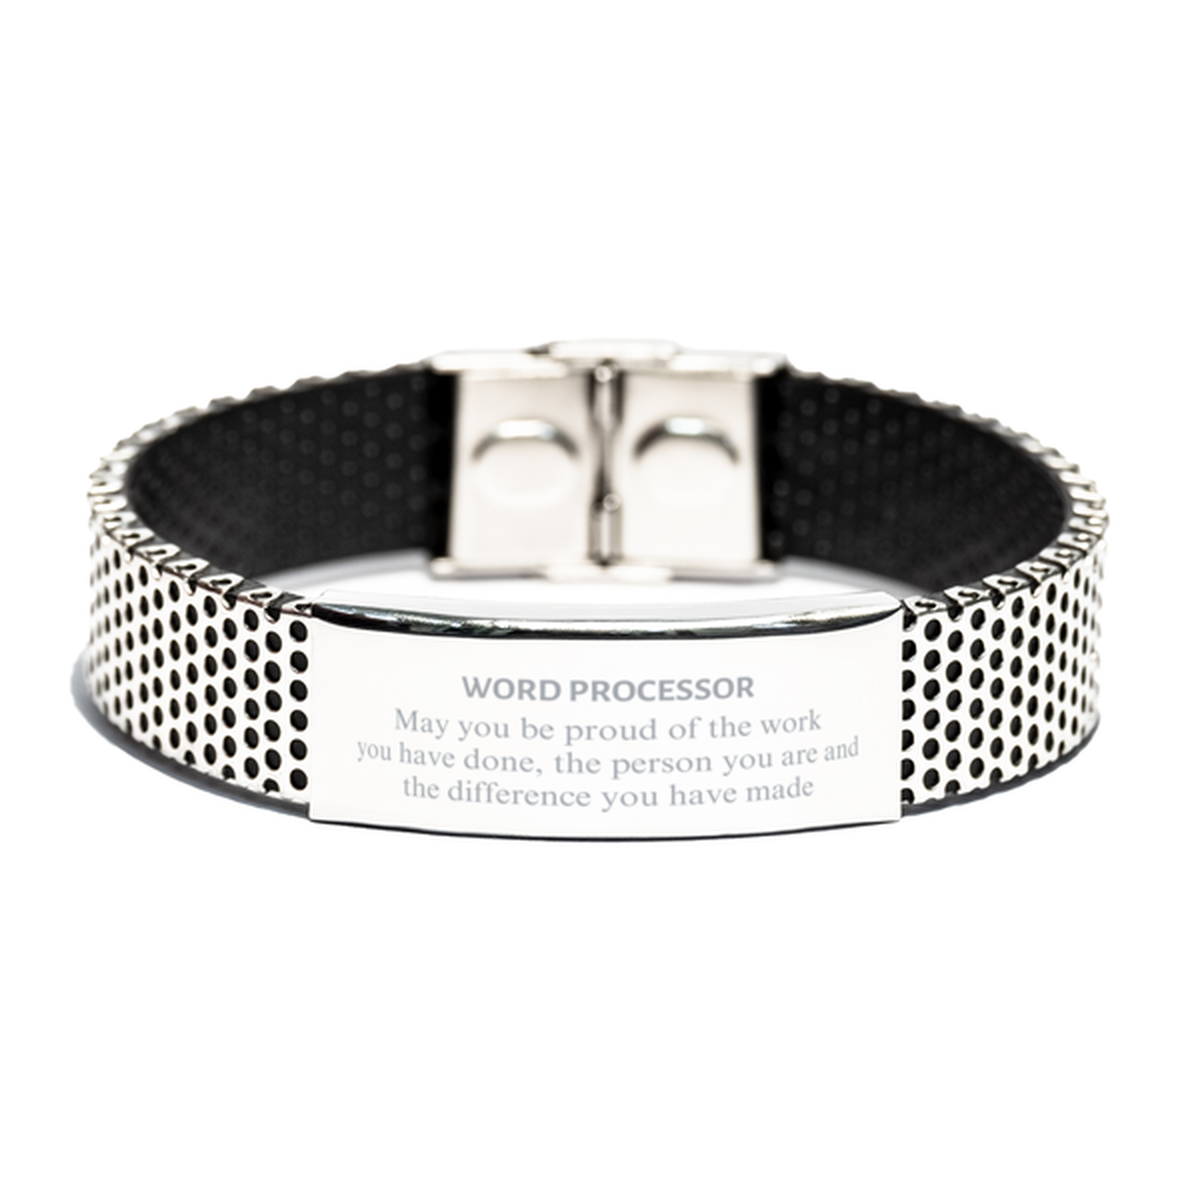 Word Processor May you be proud of the work you have done, Retirement Word Processor Stainless Steel Bracelet for Colleague Appreciation Gifts Amazing for Word Processor